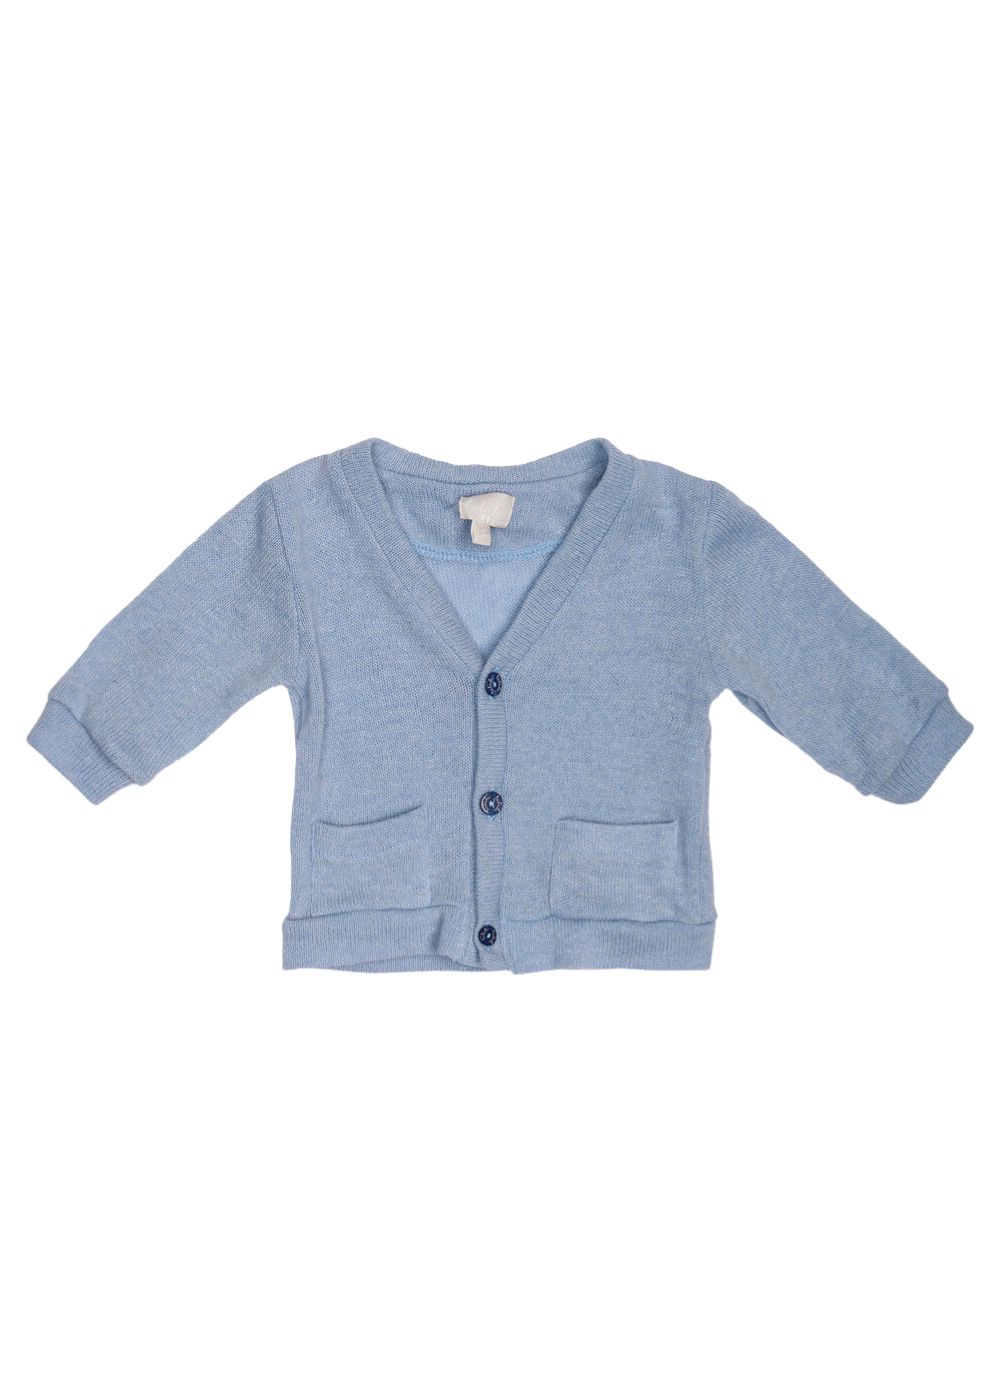 Featured image for “Lalalù Cardigan in Maglia”